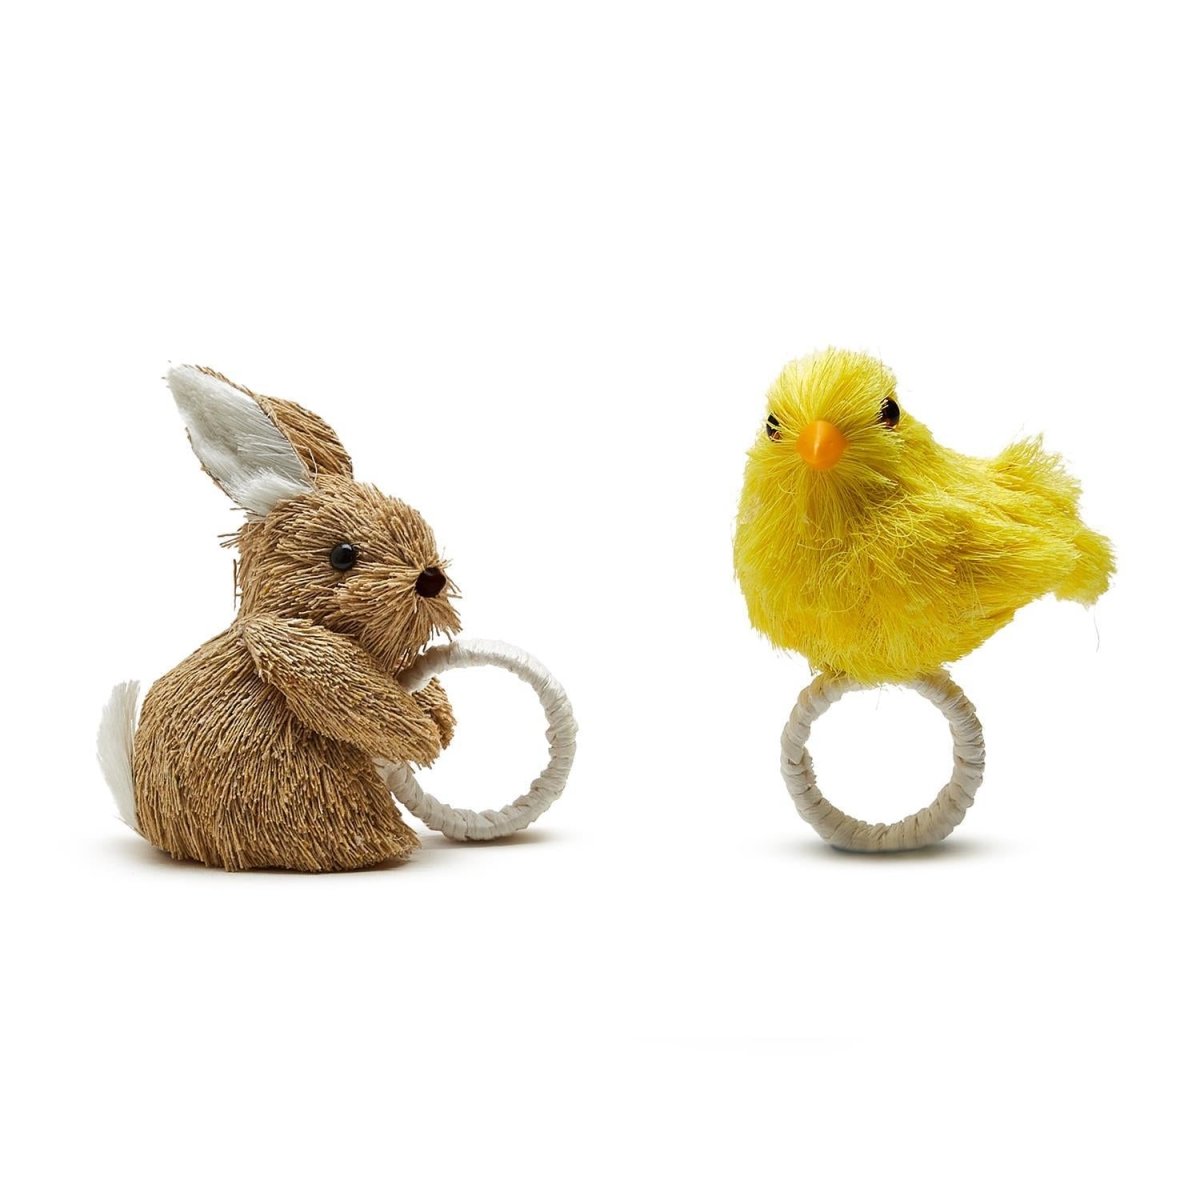 Hand-Crafted Easter Napkin Rings | Bunny or Chick